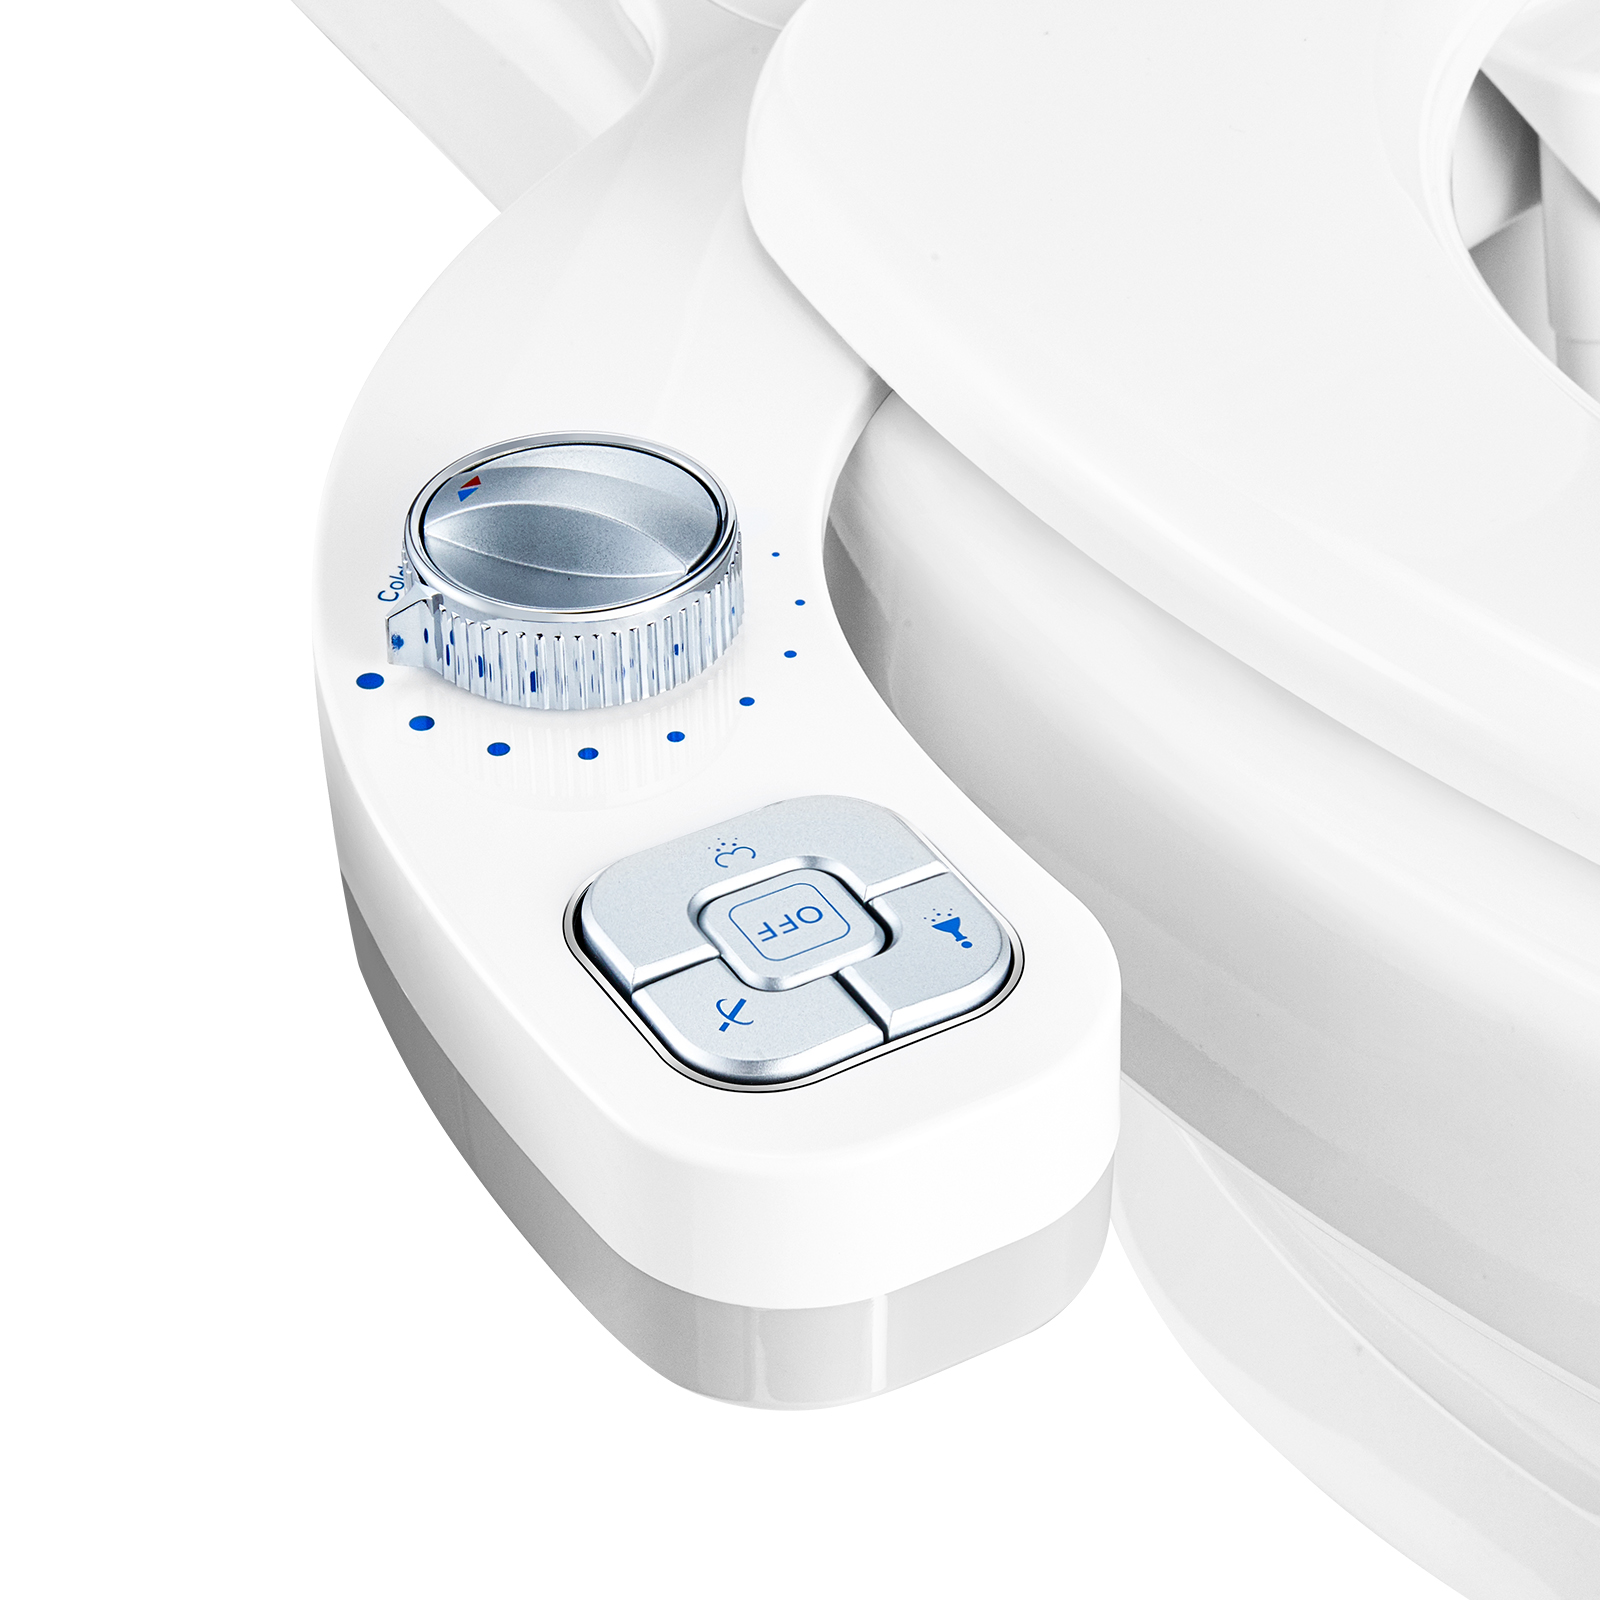 SAMODRA Ultra-Slim Bidet Attachment for Toilet - Dual Nozzle (Frontal &  Rear Wash) Hygienic Bidets for Existing Toilets - Adjustable Water Pressure